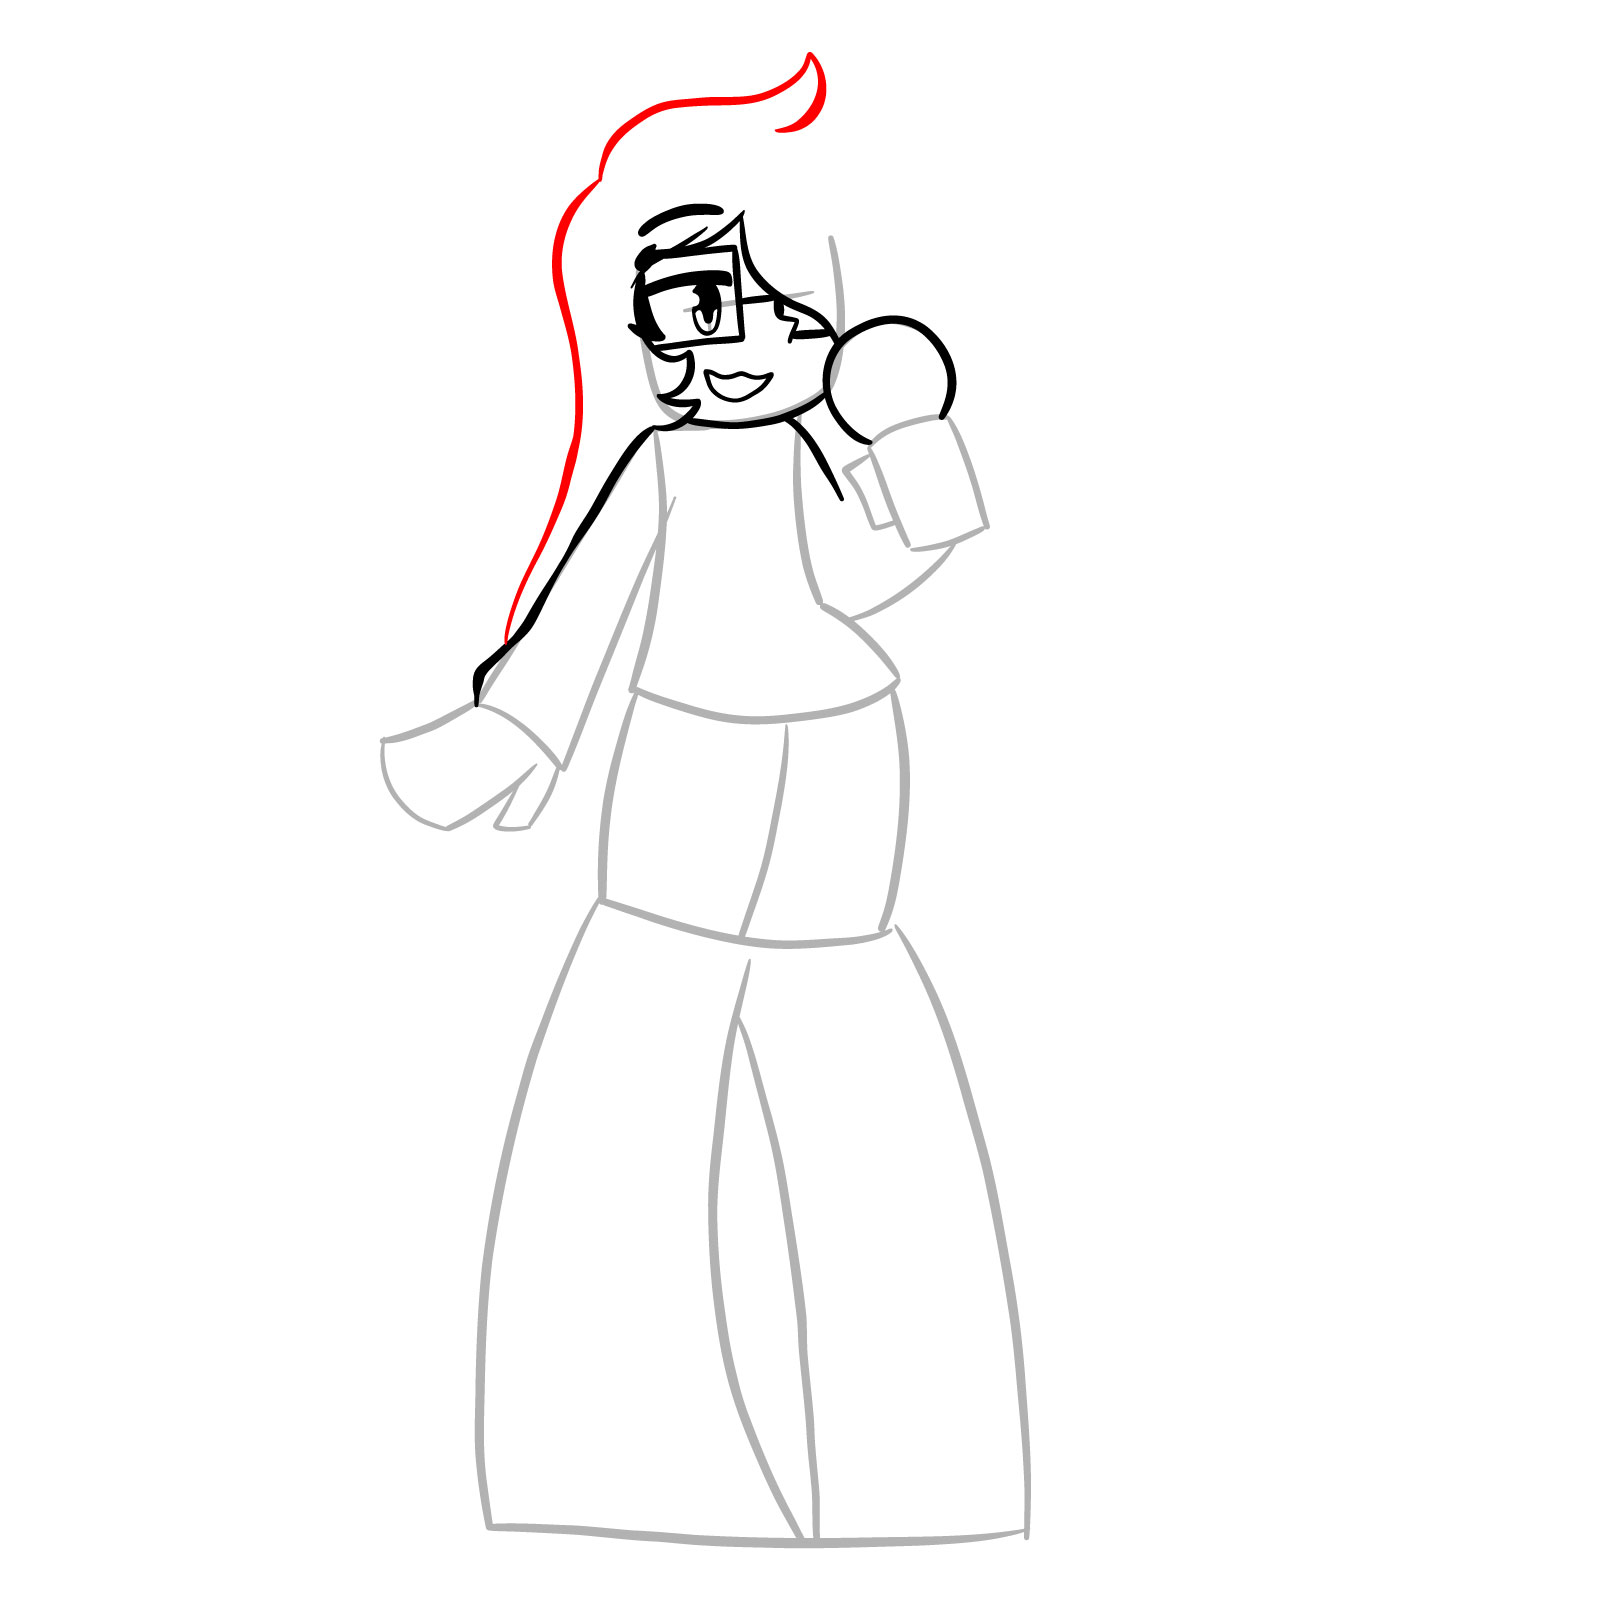 How to draw Vade from FNF - step 12